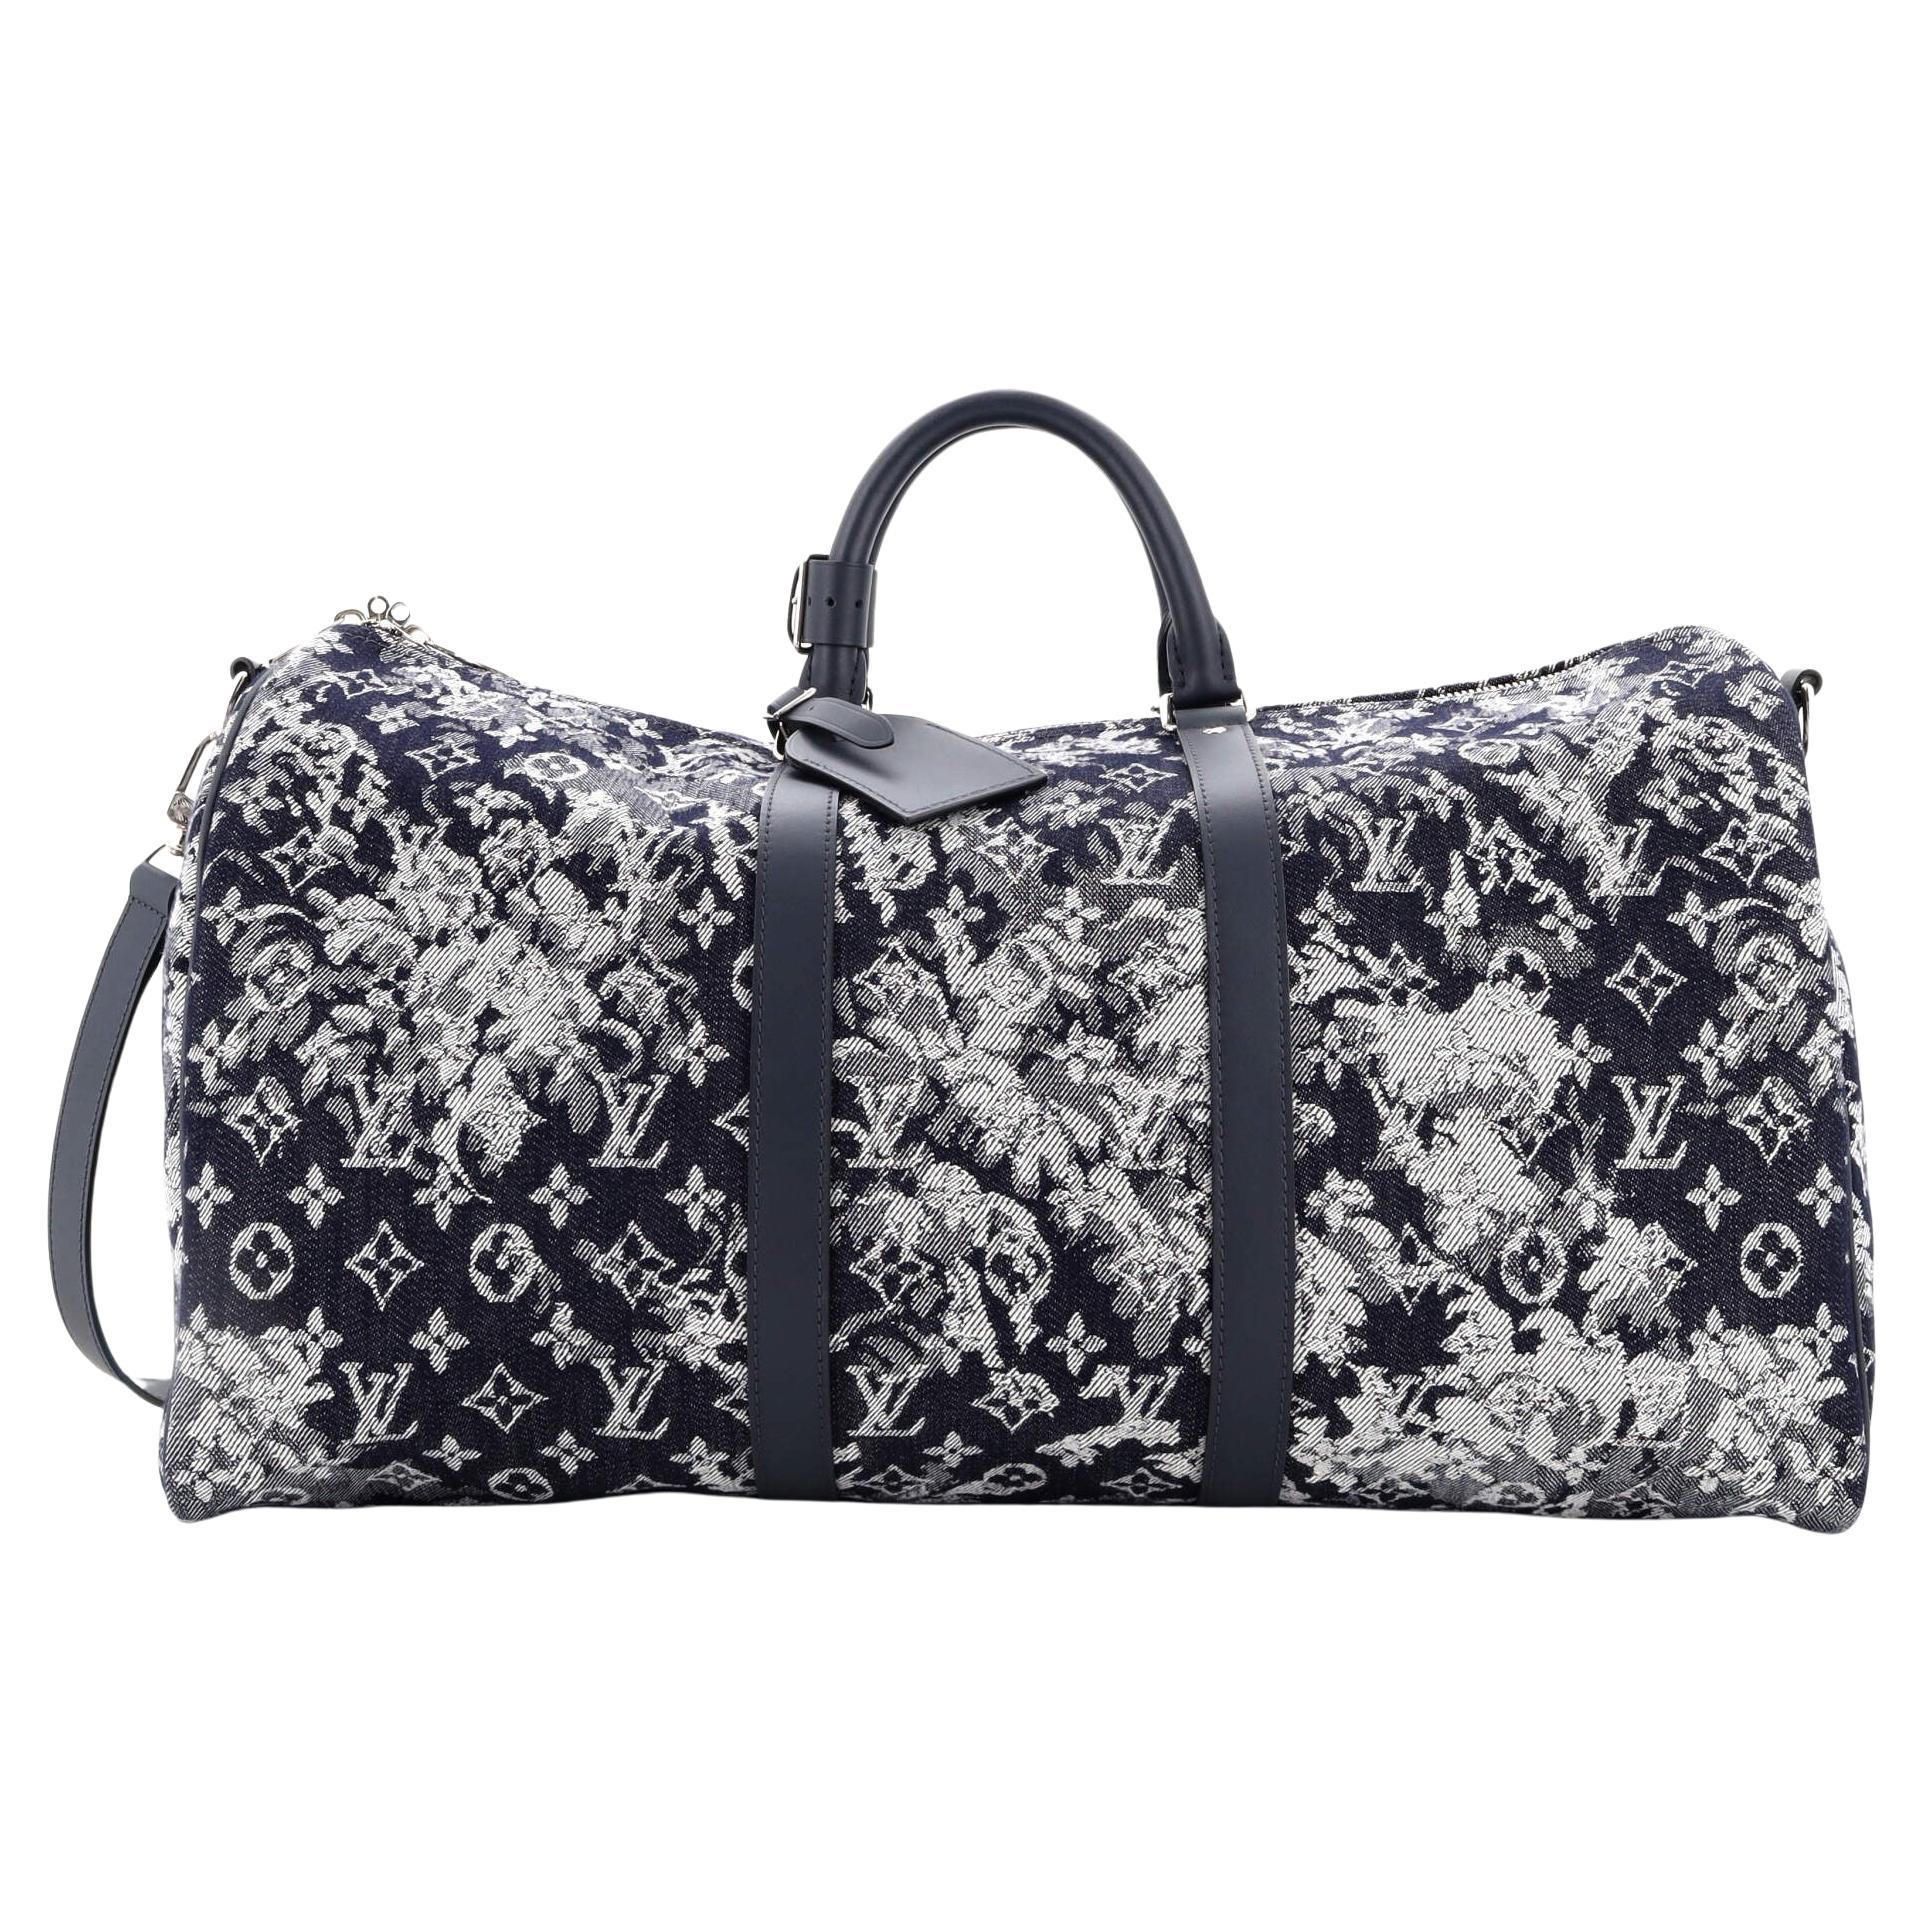 Louis Vuitton Pre-Spring 2021 Monogram Tapestry Collection